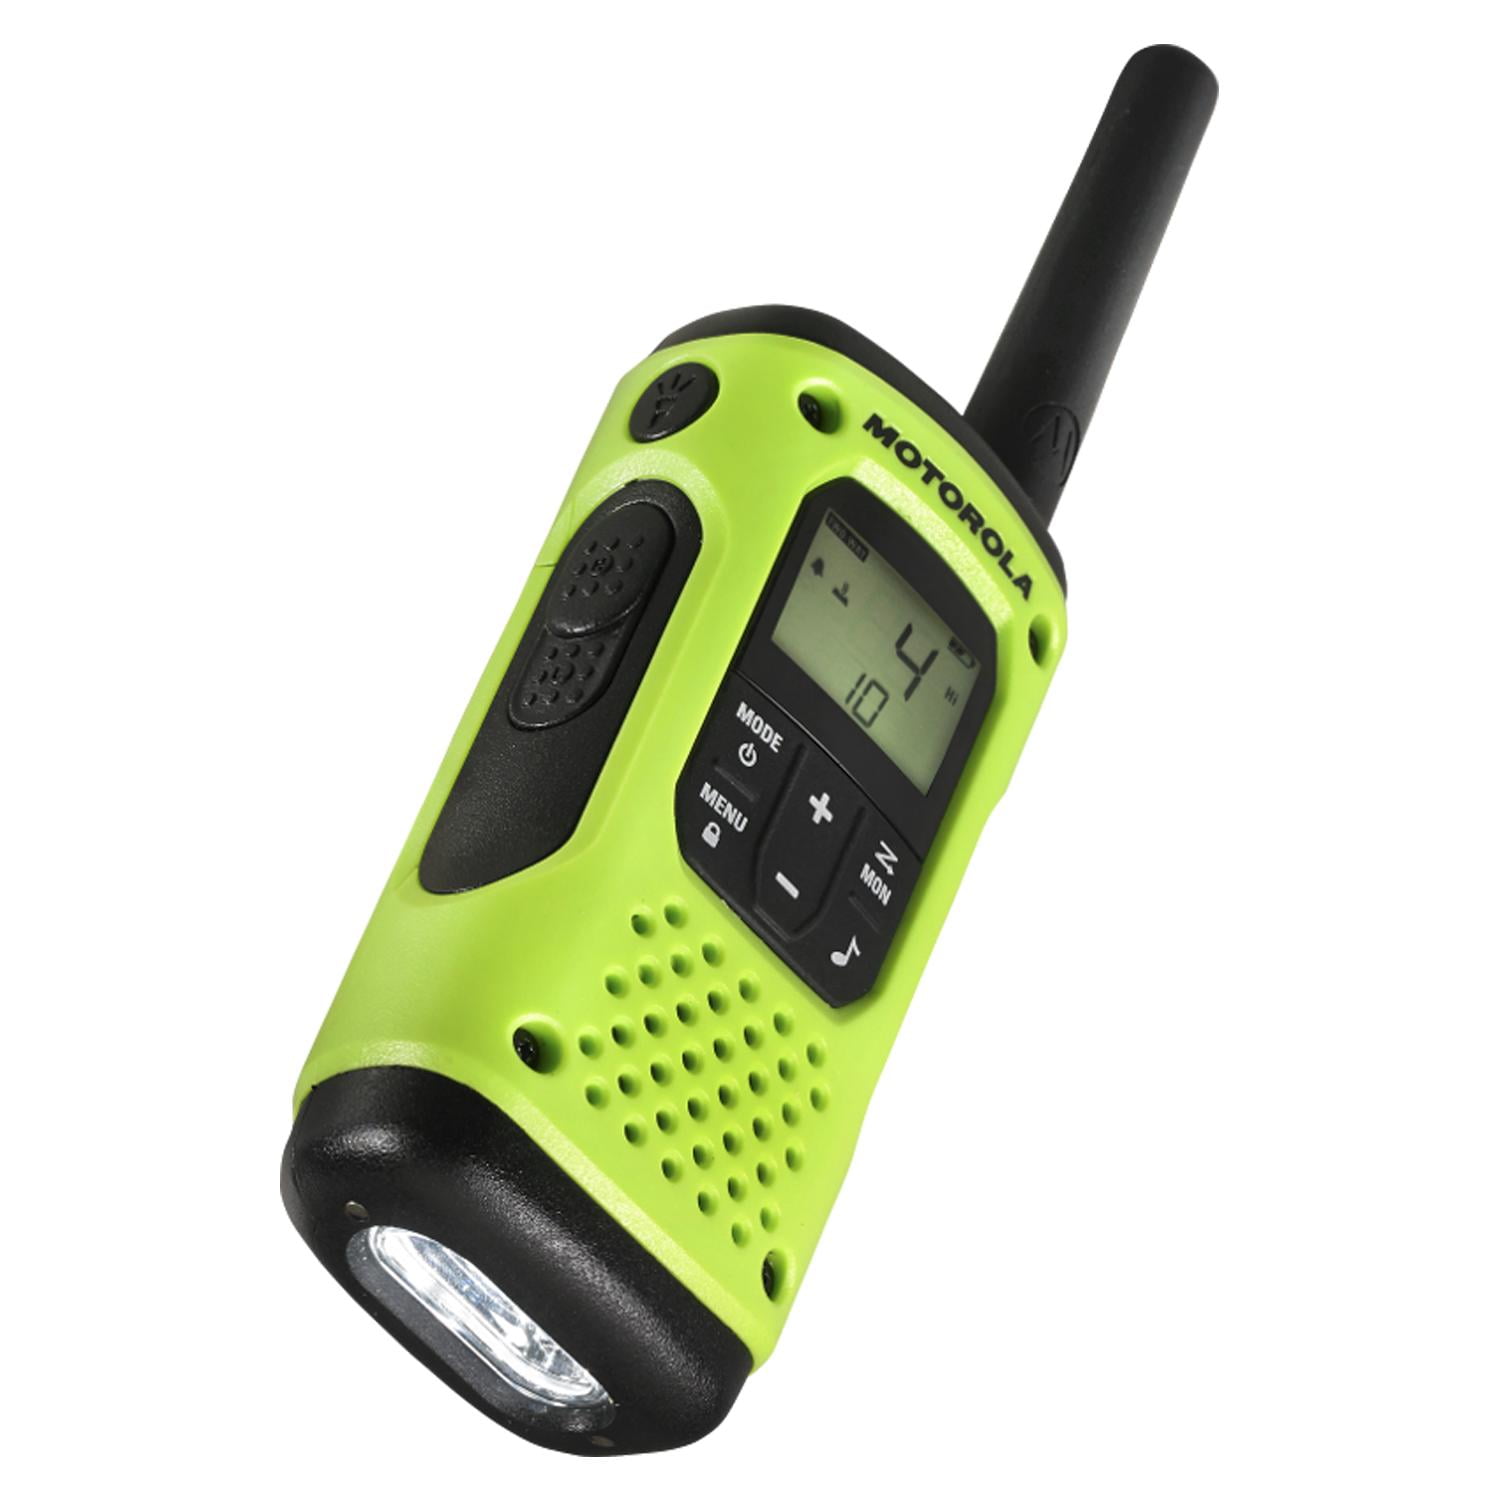 Motorola Talkabout T605 Two-Way Radios, 35-Mile Range, Walkie Talkie with  Cases Included (12-Pack) Lime